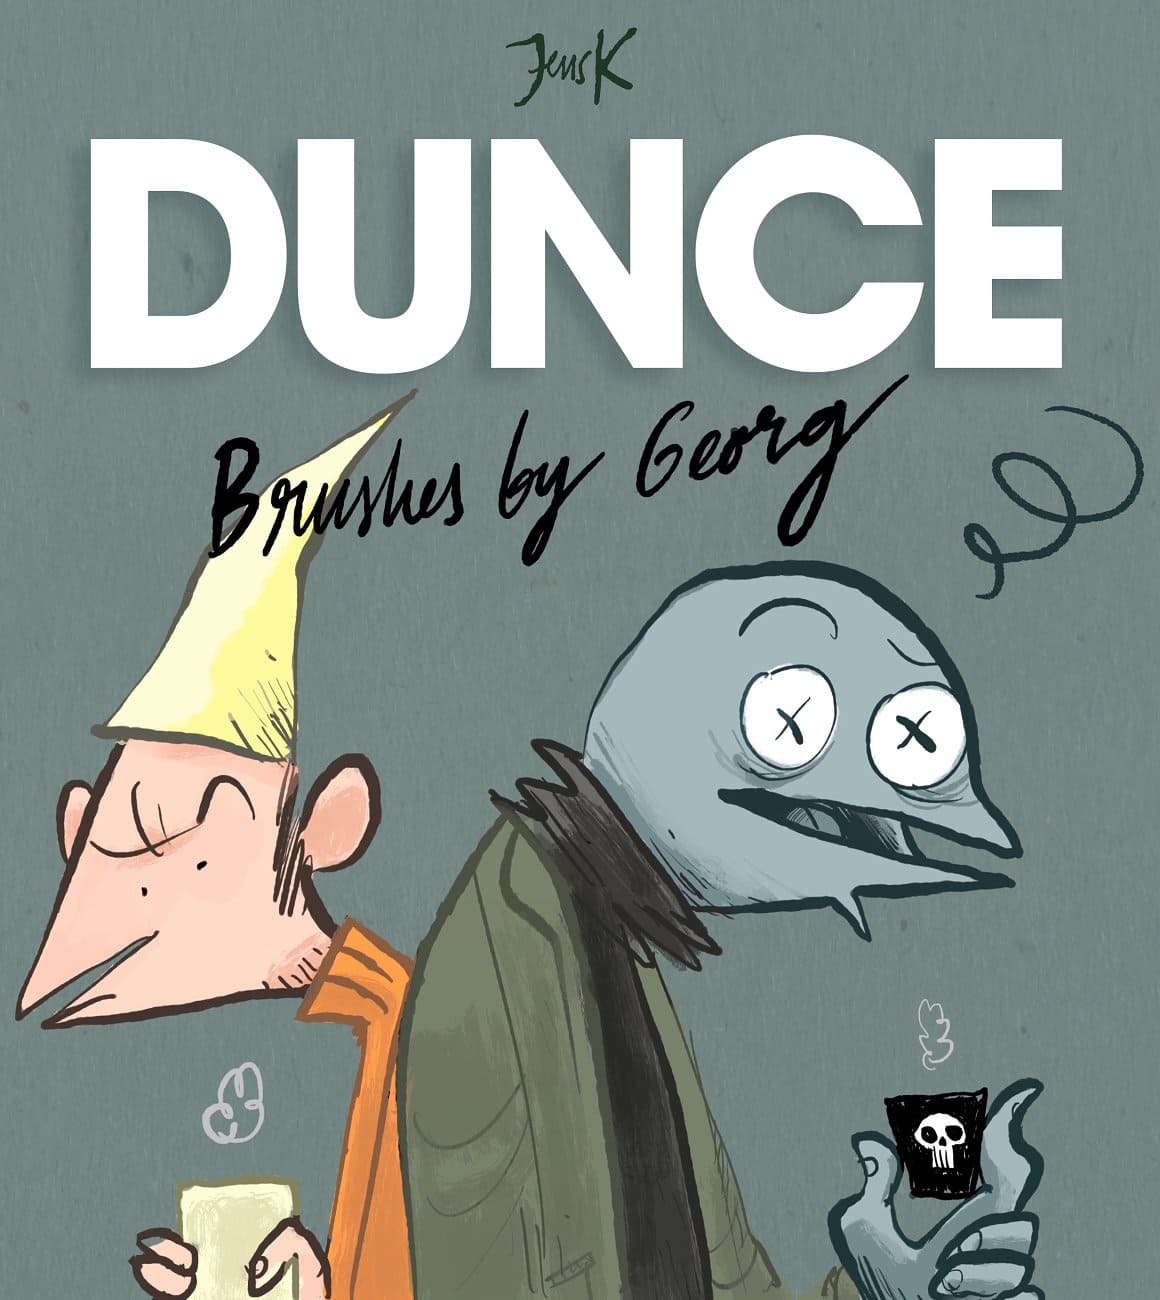 Jensk dunce cover new year, 1160 by 1300 pixels.